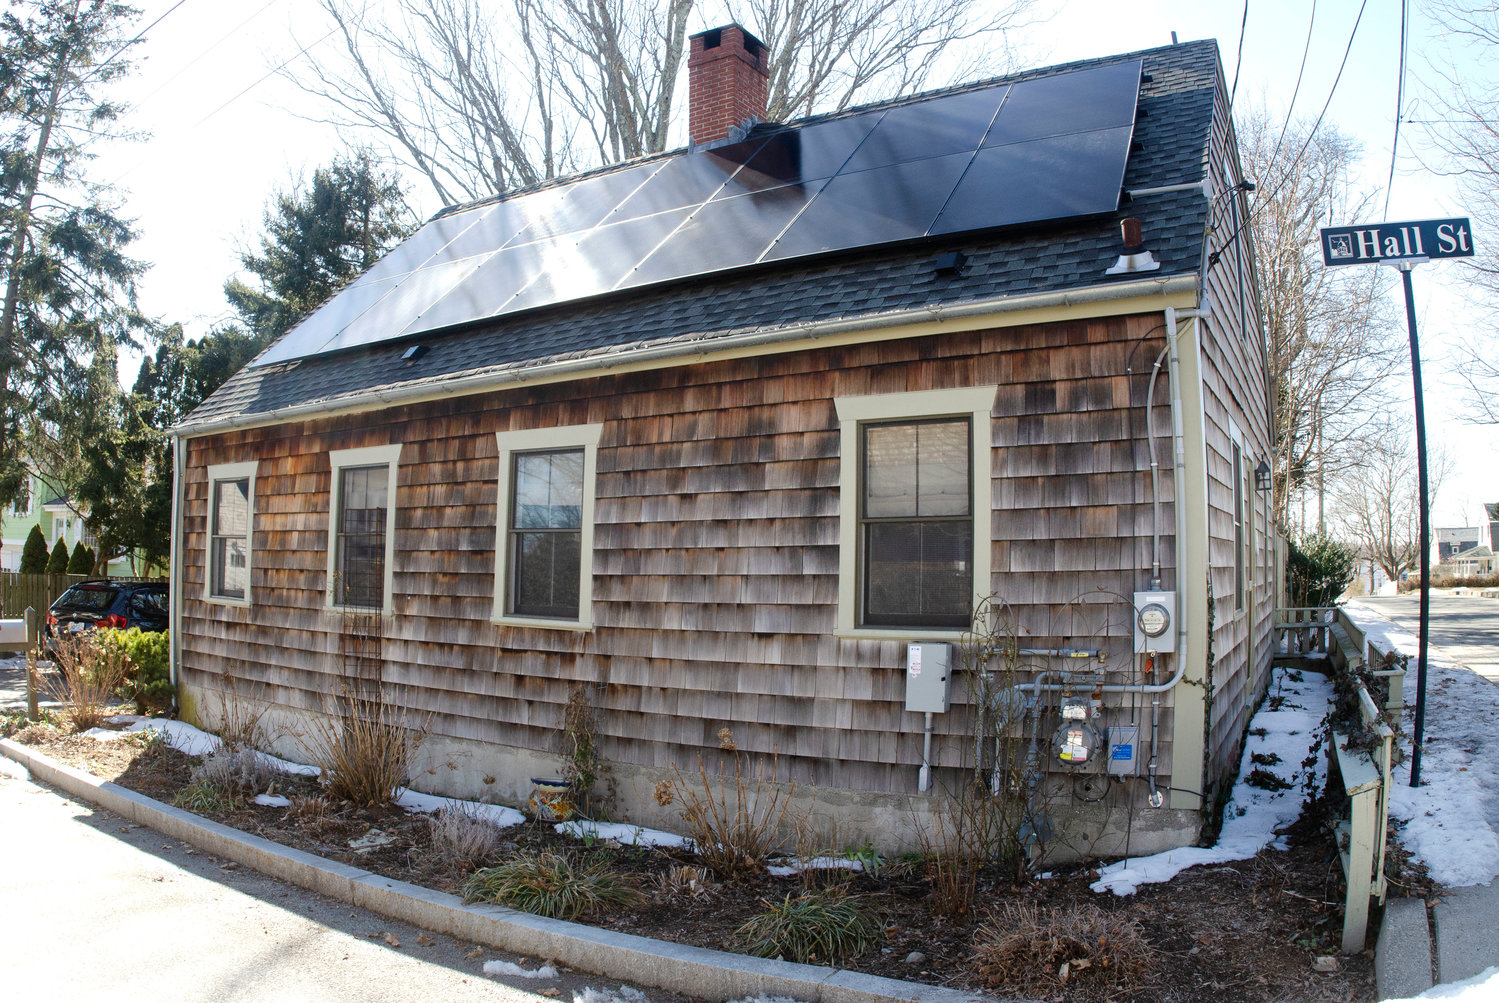 The Hendersons filled the east-facing roof of their home with solar panels that should power most of their energy needs for the foreseeable future.